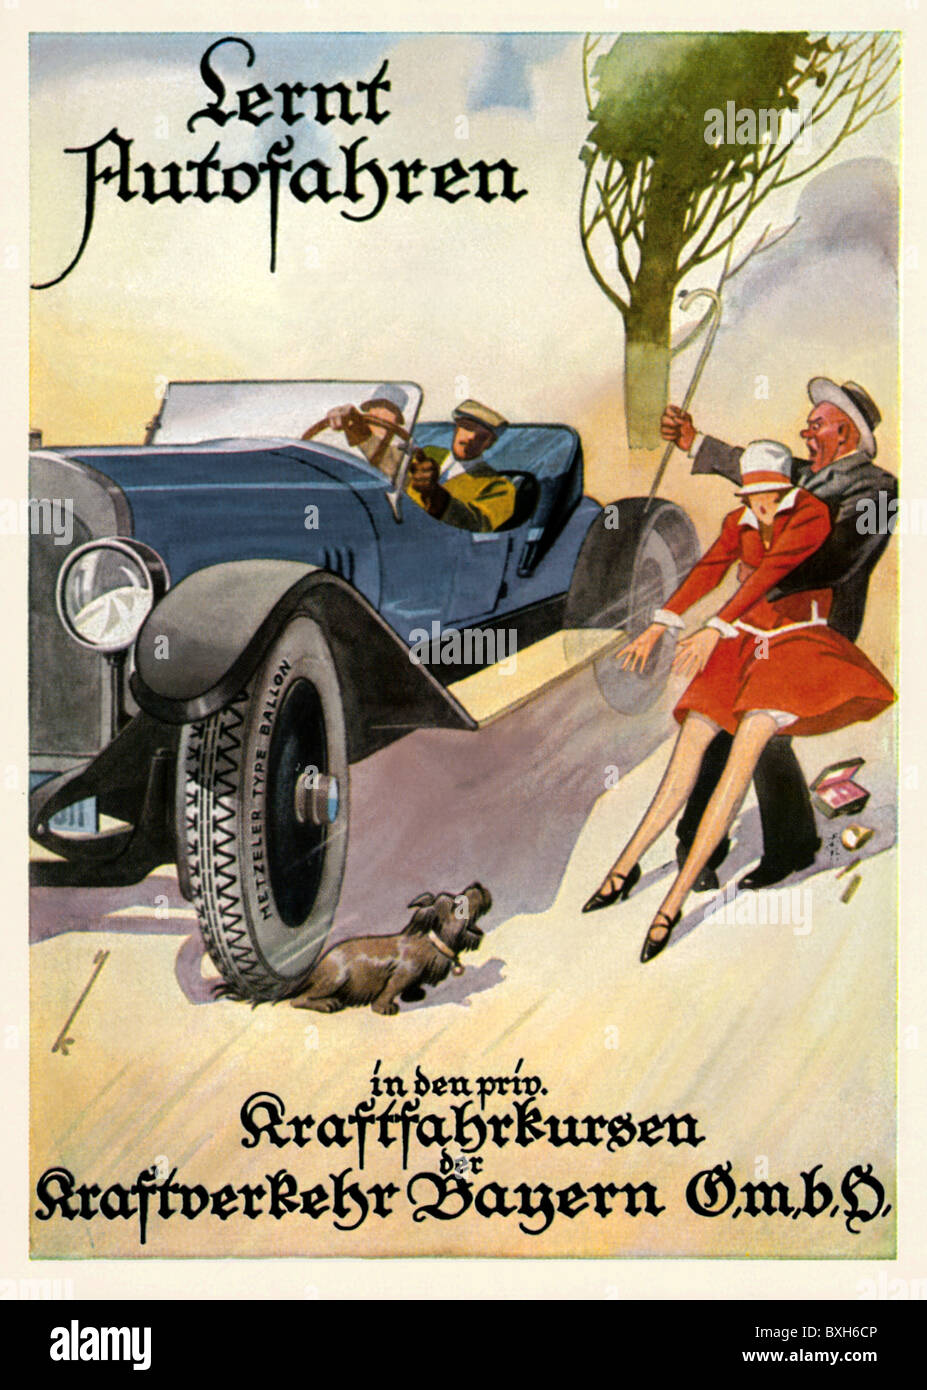 advertising,transport,car,driving school,driving,motoring,private driving school of Kraftverkehr Bayern G.m.b.H.,Germany,1928,1920s,20s,20th century,historic,historical,humor,humour,road hog,road hogs,pedestrian,pedestrians,walker,walkers,jaywalker,dog,dogs,overrun,overrunning,overrun,overruns,overran,run down,run over,running down,running over,run down,run over,runs down,runs over,ran down,ran over,fast,faster,fastest,speed,learning,curse,cursing,cursed,tearaway,unthoughtful,irrespective,inconsiderate,traffic,,Additional-Rights-Clearences-Not Available Stock Photo